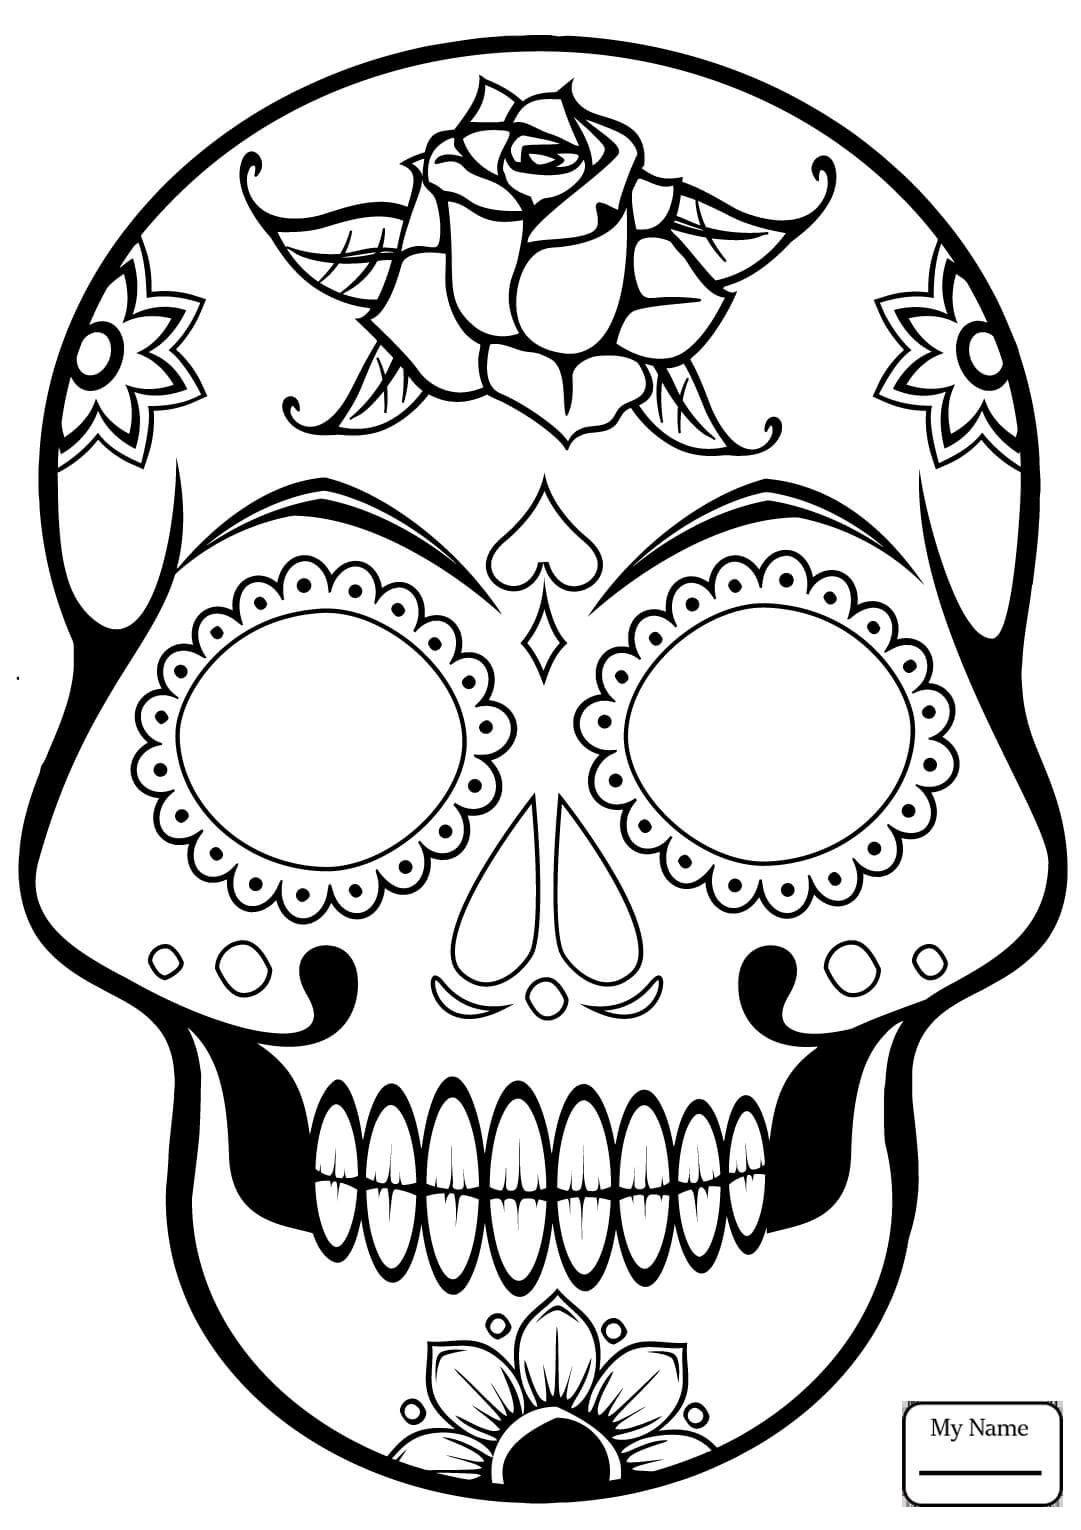 The Best Free Sugar Drawing Images. Download From 2224 Free Regarding Blank Sugar Skull Template